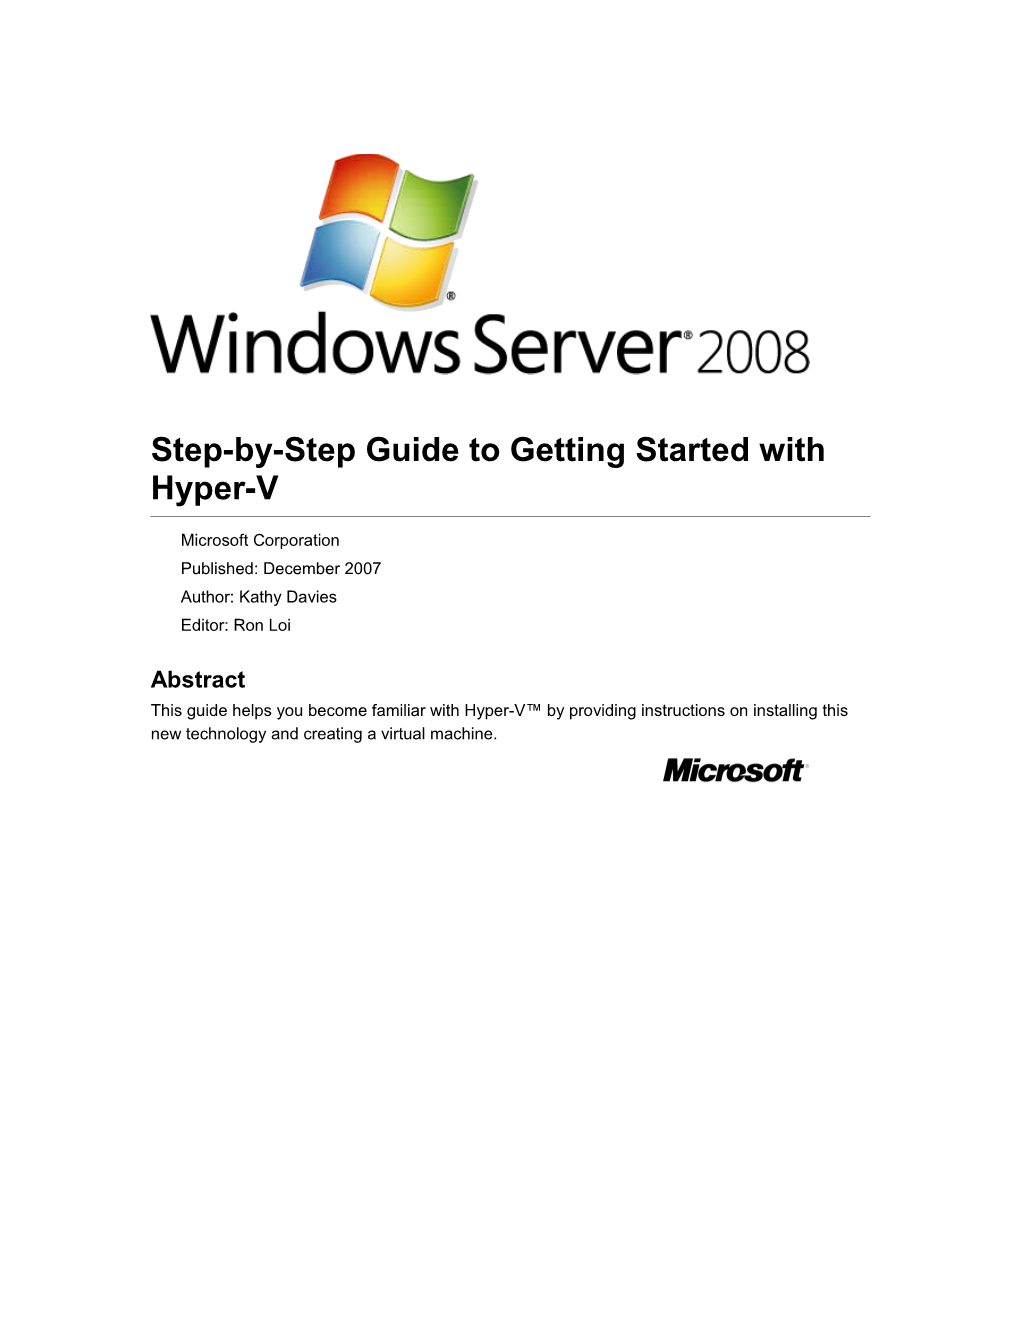 Step-By-Step Guide to Getting Started with Hyper-V